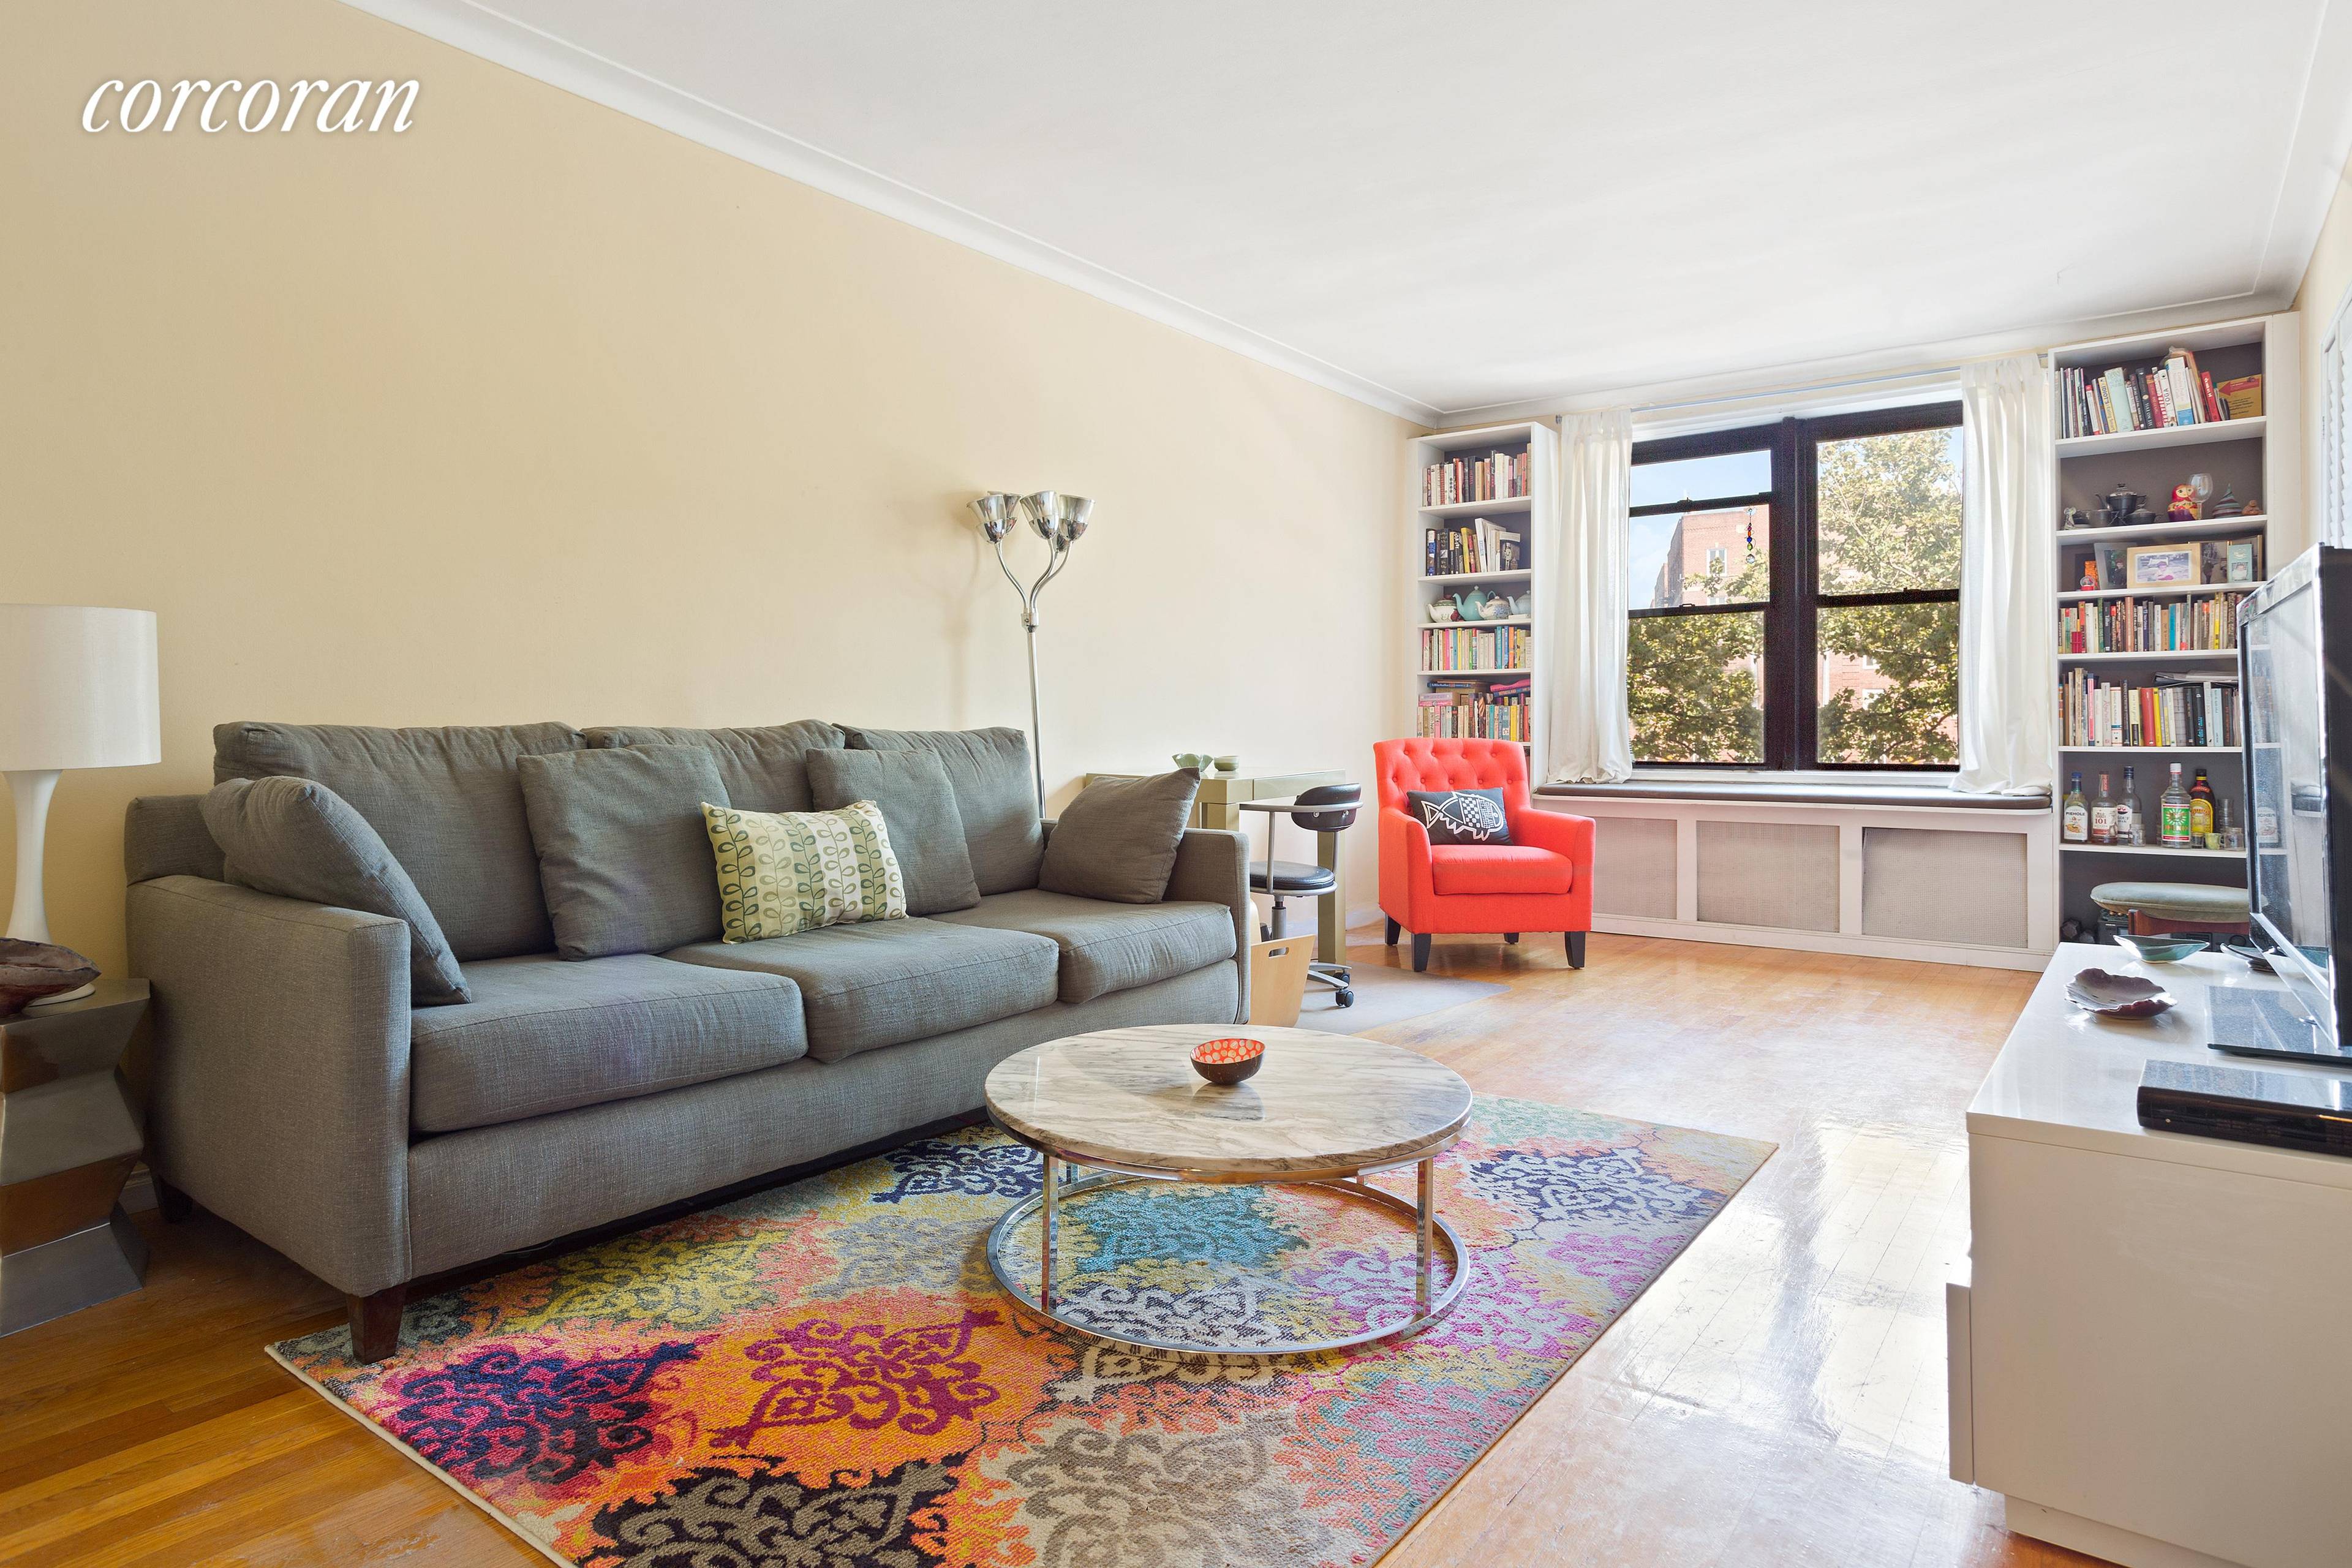 110 Ocean Parkway 2D is a spacious and lovely two bedroom co op located in the Windsor Terrace Kensington section of Brooklyn.